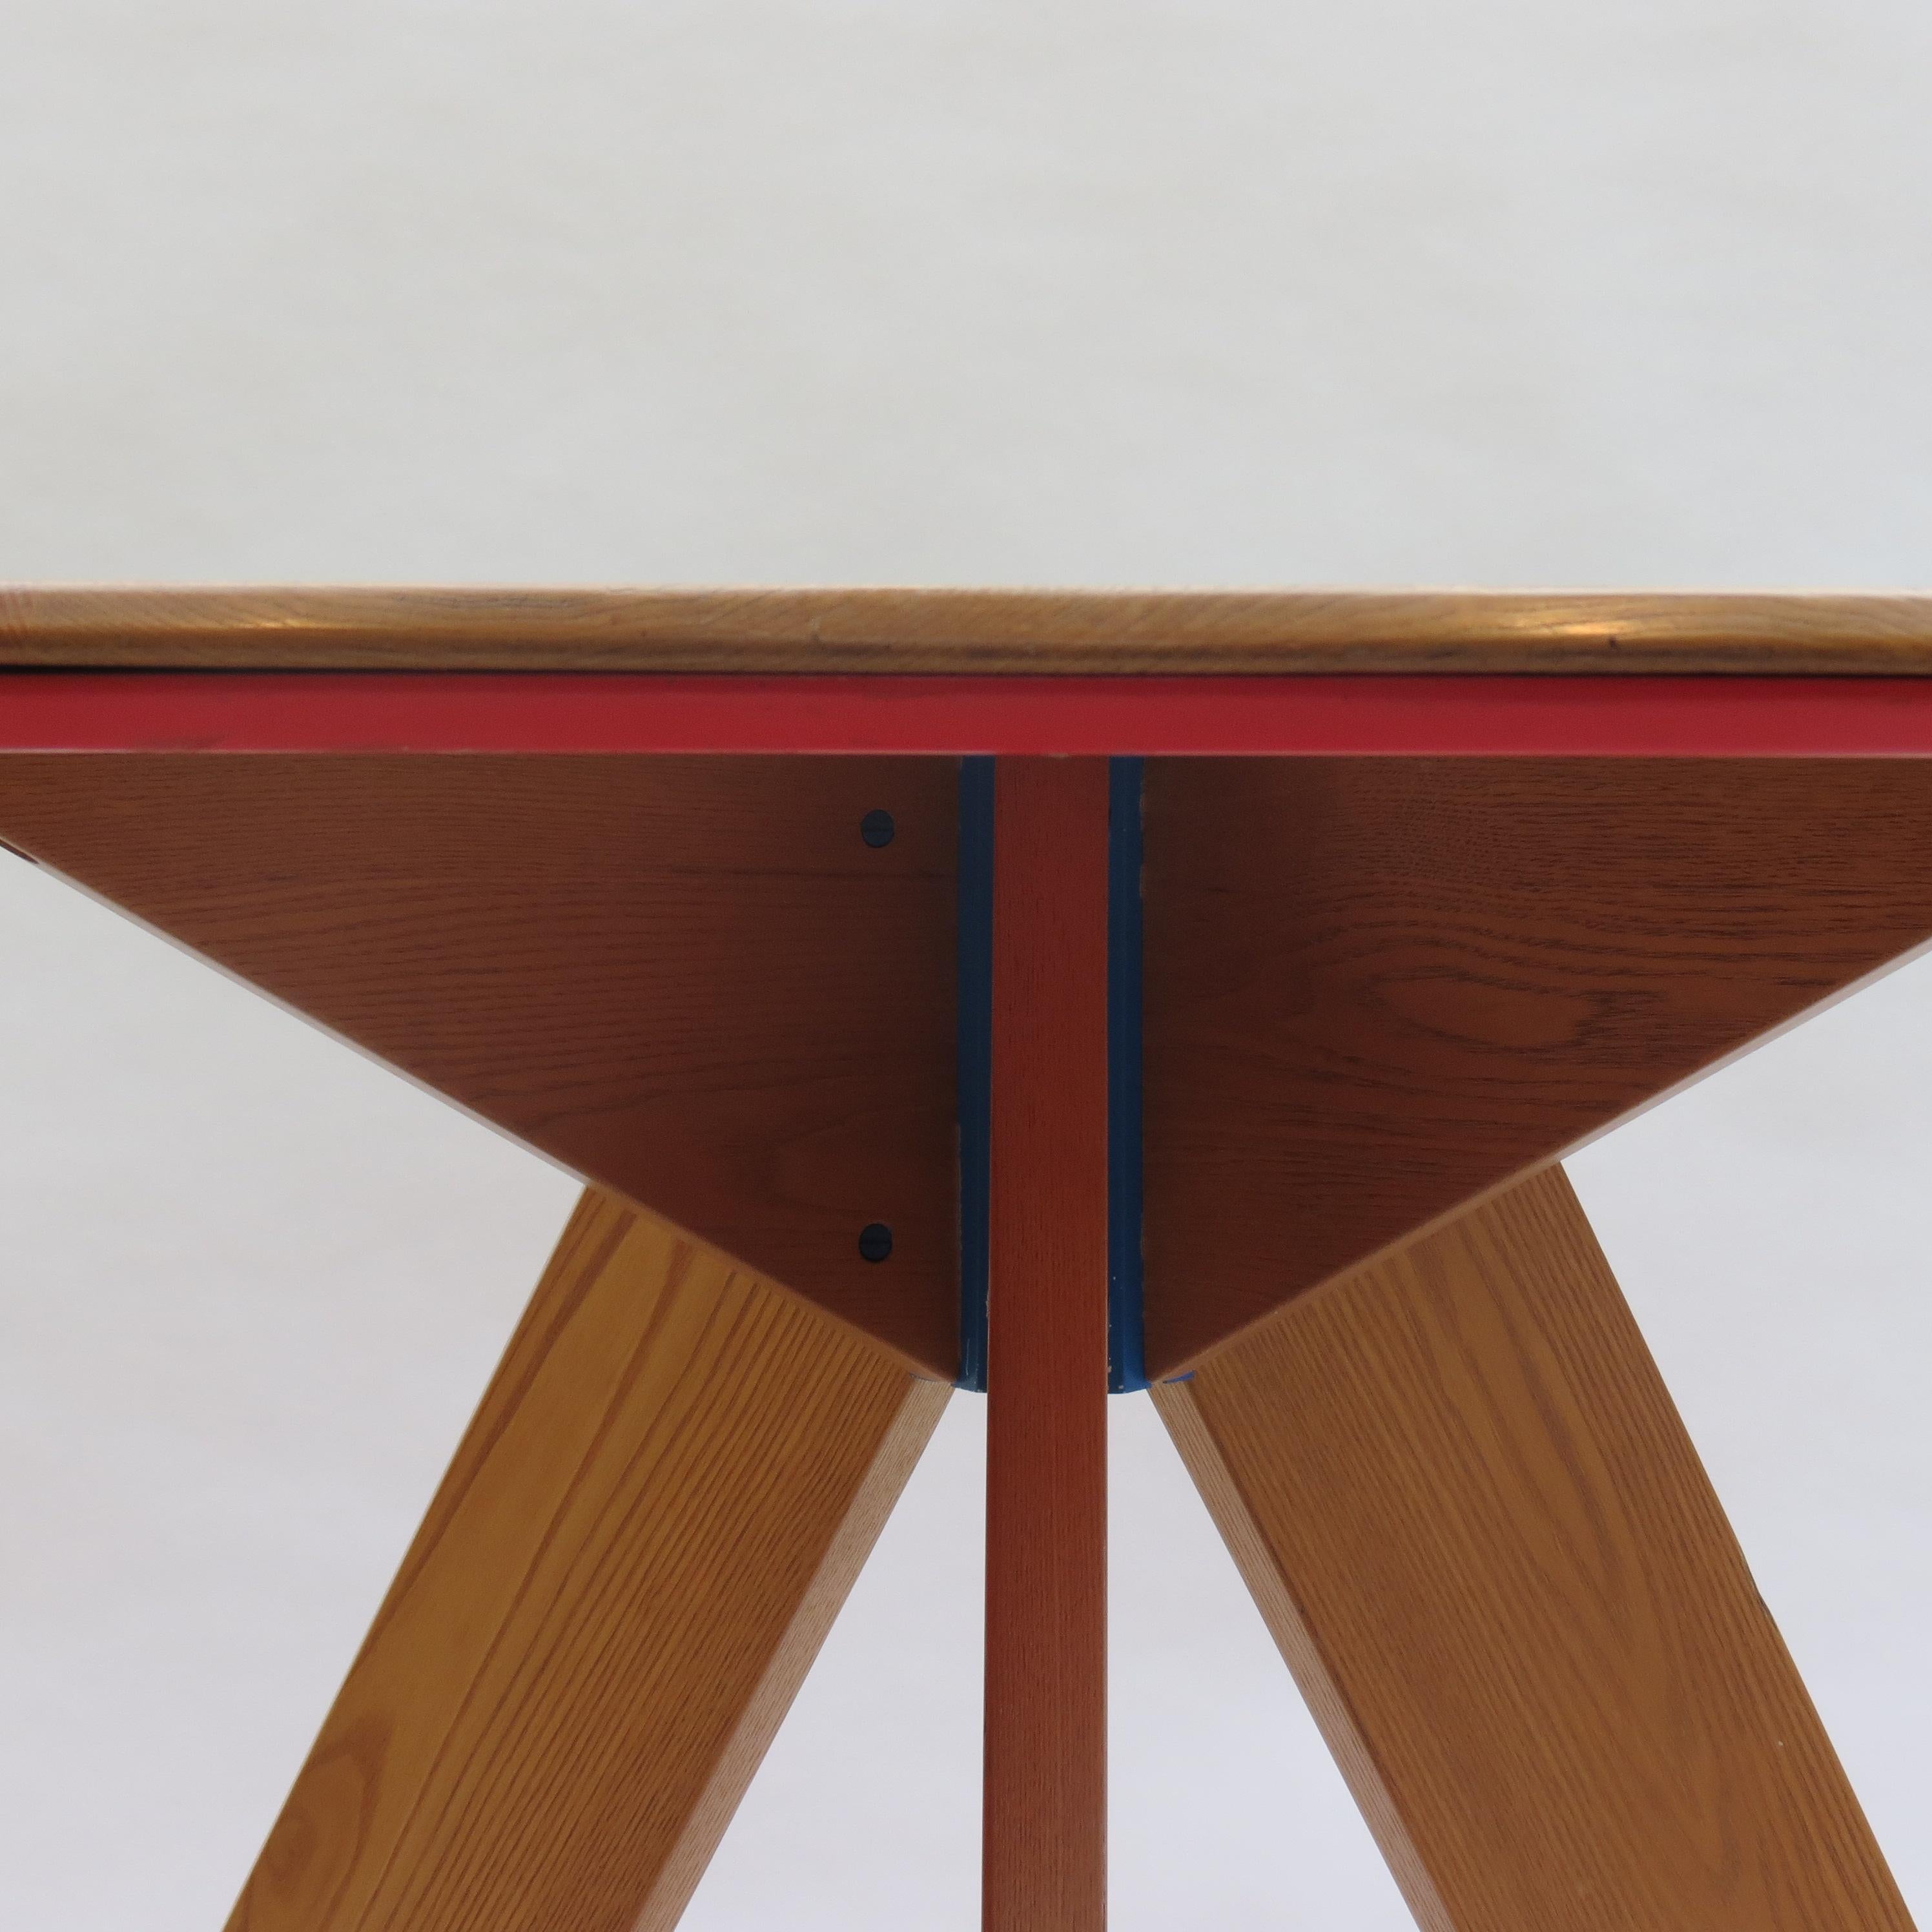 English Midcentury Bespoke Round Dining Table by David Field 1980s with Red Blue Detail